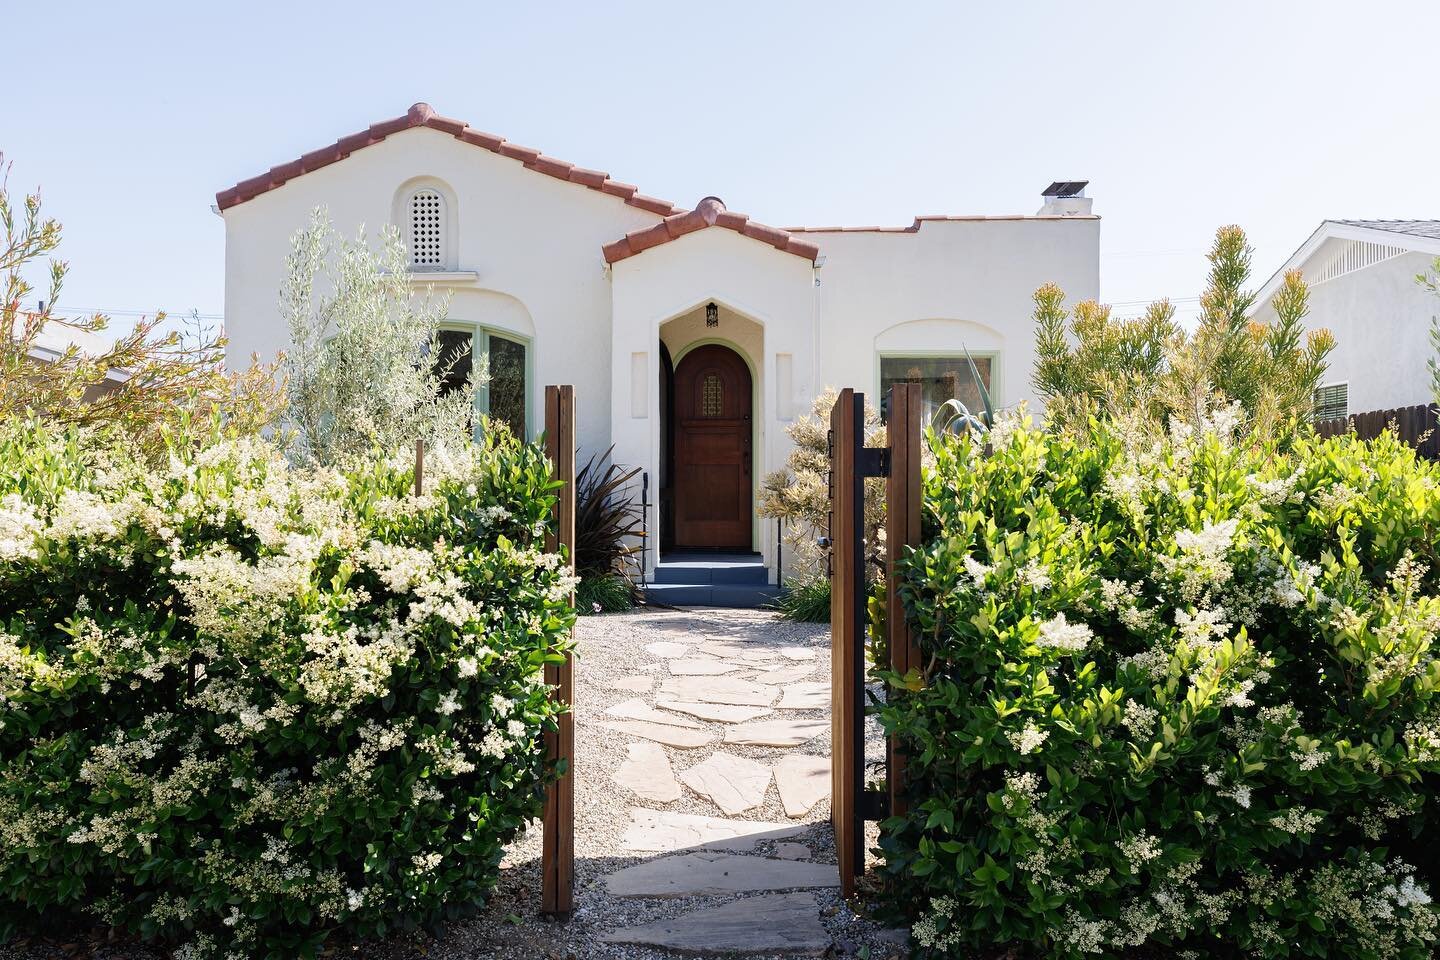 JUST LISTED! ⚡

Welcome to 5326 Stratford Rd, a rejuvenated Spanish home sitting on a quiet street, right in the excitement that is Highland Park. The front of the home is framed by lush hedges, currently in full springtime bloom. The front gate will